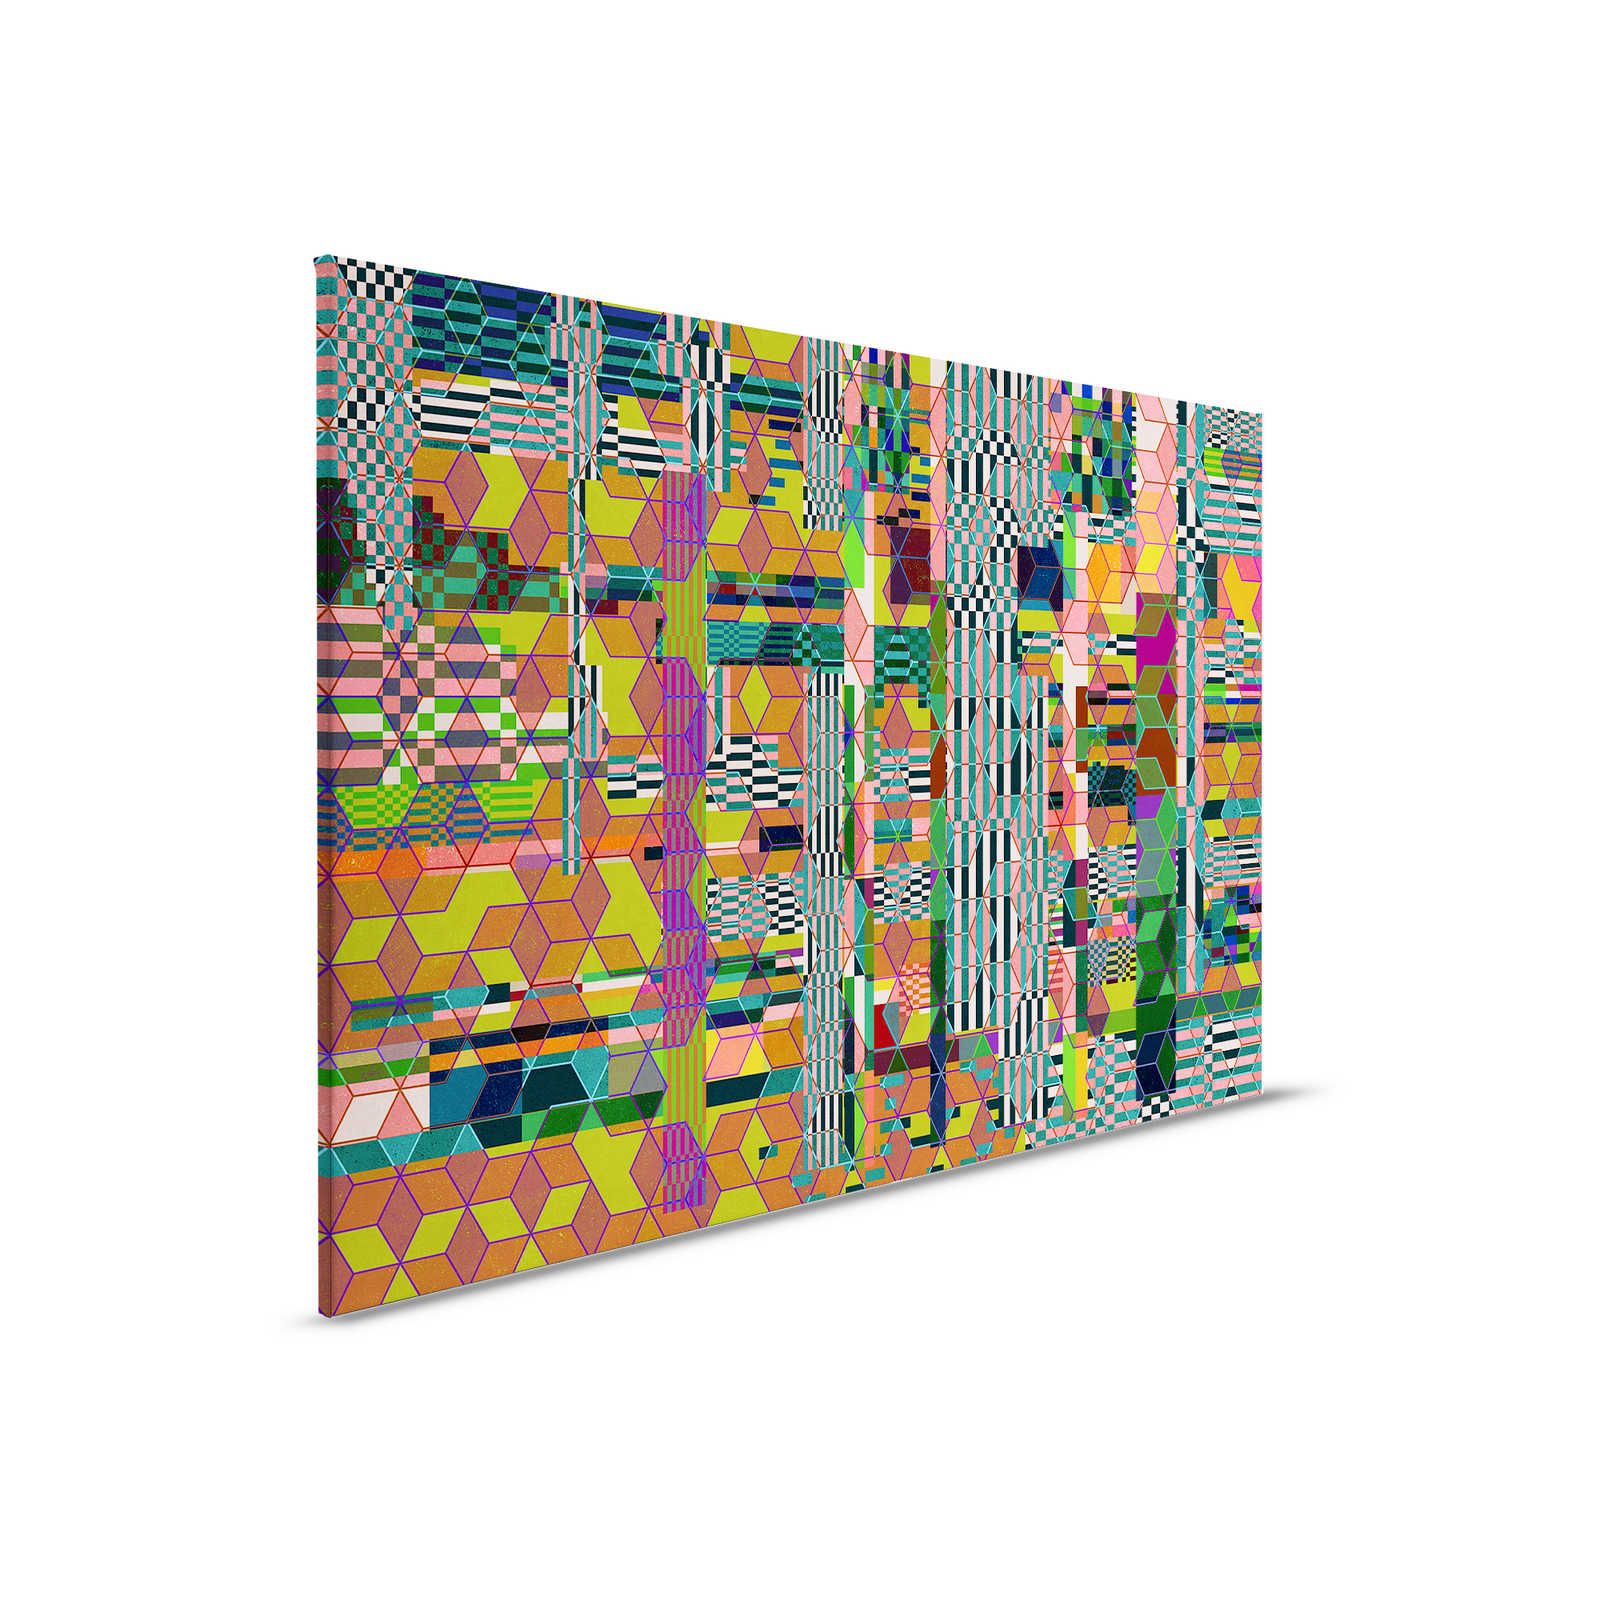         Mirage 1 - Canvas painting Graphic Mosaic Pattern Coloured - 0,90 m x 0,60 m
    